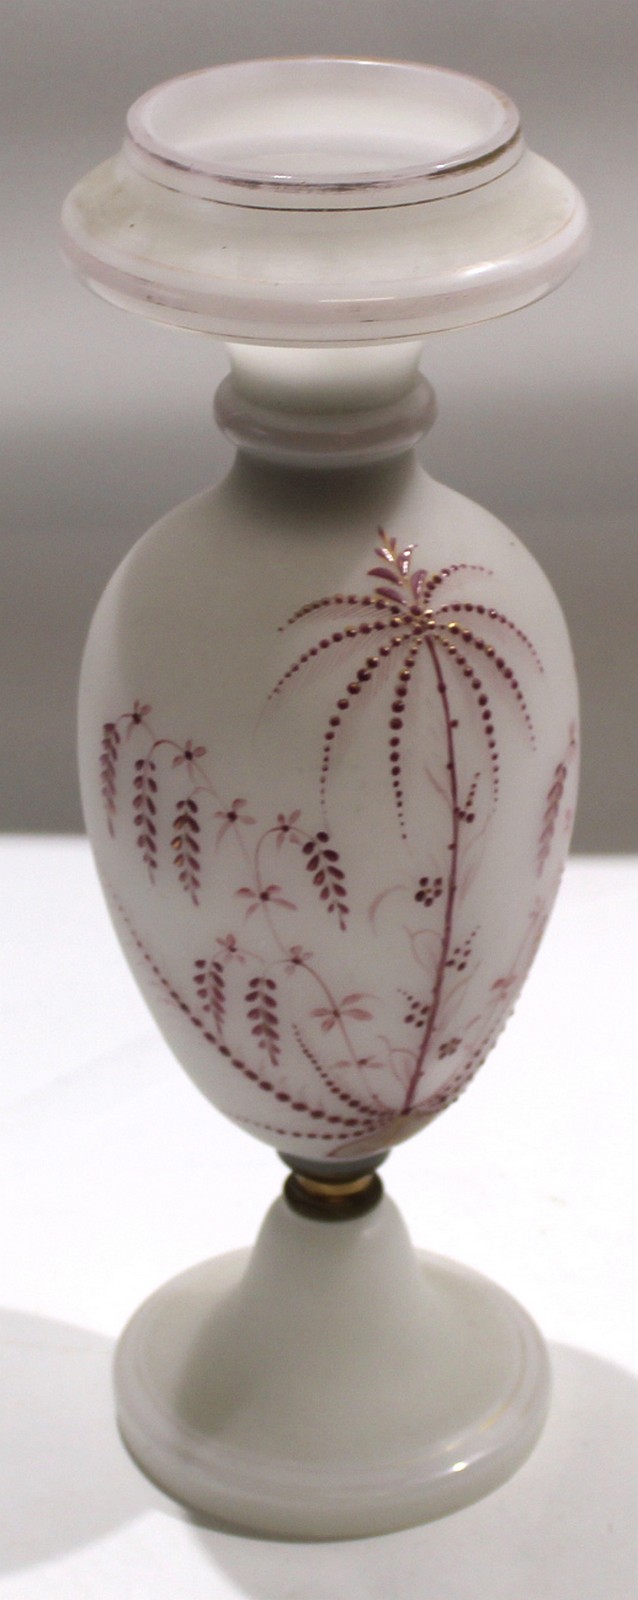 Milk glass lamp with a painted floral design in puce^ 35cm high - Image 2 of 2